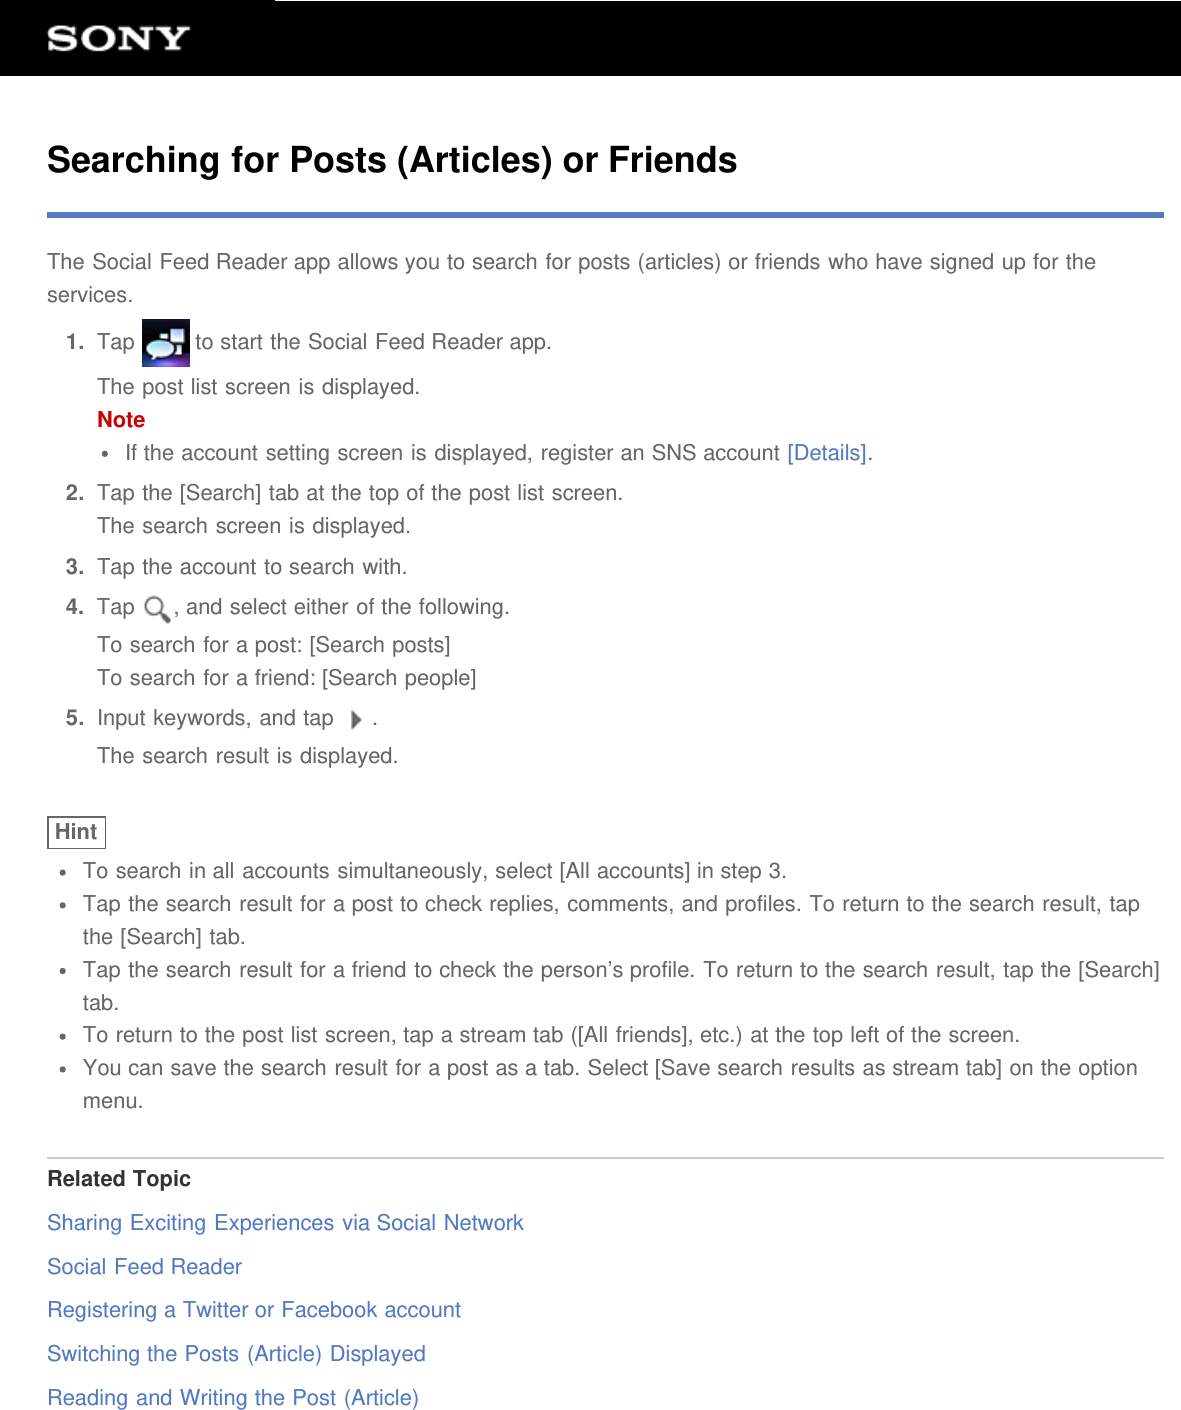 Searching for Posts (Articles) or FriendsThe Social Feed Reader app allows you to search for posts (articles) or friends who have signed up for theservices.1.  Tap   to start the Social Feed Reader app.The post list screen is displayed.NoteIf the account setting screen is displayed, register an SNS account [Details].2.  Tap the [Search] tab at the top of the post list screen.The search screen is displayed.3.  Tap the account to search with.4.  Tap  , and select either of the following.To search for a post: [Search posts]To search for a friend: [Search people]5.  Input keywords, and tap  .The search result is displayed.HintTo search in all accounts simultaneously, select [All accounts] in step 3.Tap the search result for a post to check replies, comments, and profiles. To return to the search result, tapthe [Search] tab.Tap the search result for a friend to check the person’s profile. To return to the search result, tap the [Search]tab.To return to the post list screen, tap a stream tab ([All friends], etc.) at the top left of the screen.You can save the search result for a post as a tab. Select [Save search results as stream tab] on the optionmenu.Related TopicSharing Exciting Experiences via Social NetworkSocial Feed ReaderRegistering a Twitter or Facebook accountSwitching the Posts (Article) DisplayedReading and Writing the Post (Article)